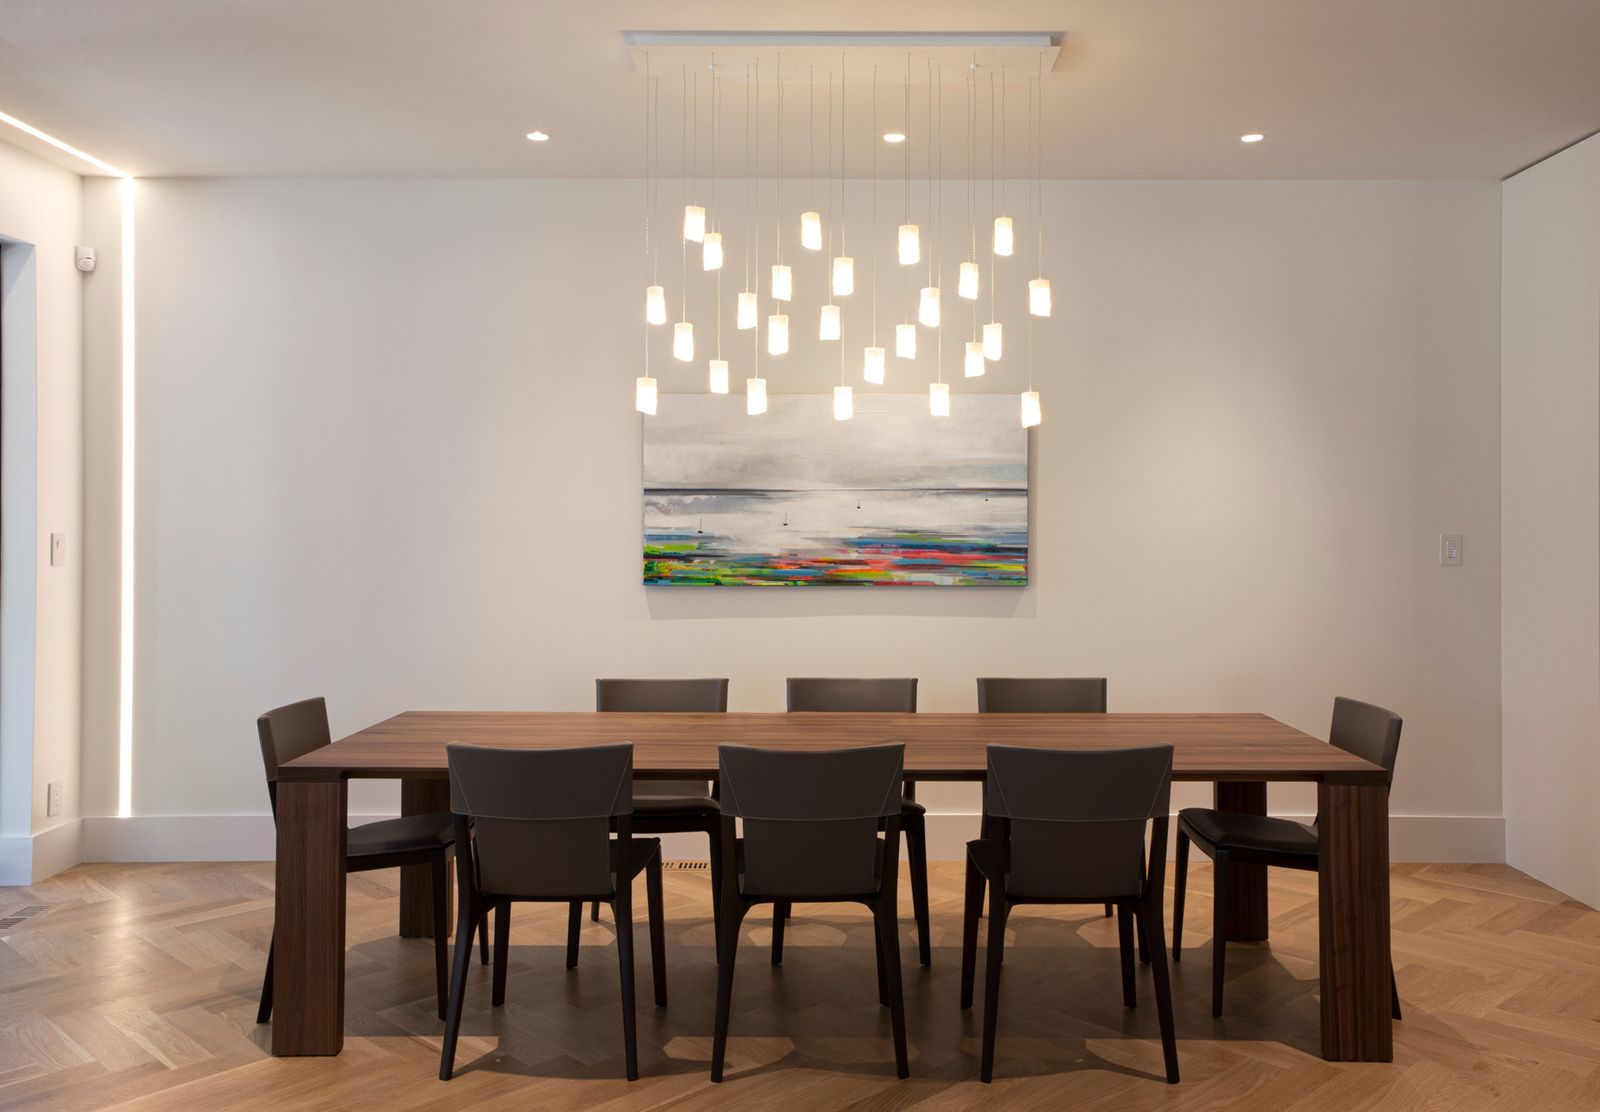 Minimal dining room with pendant lighting above large table